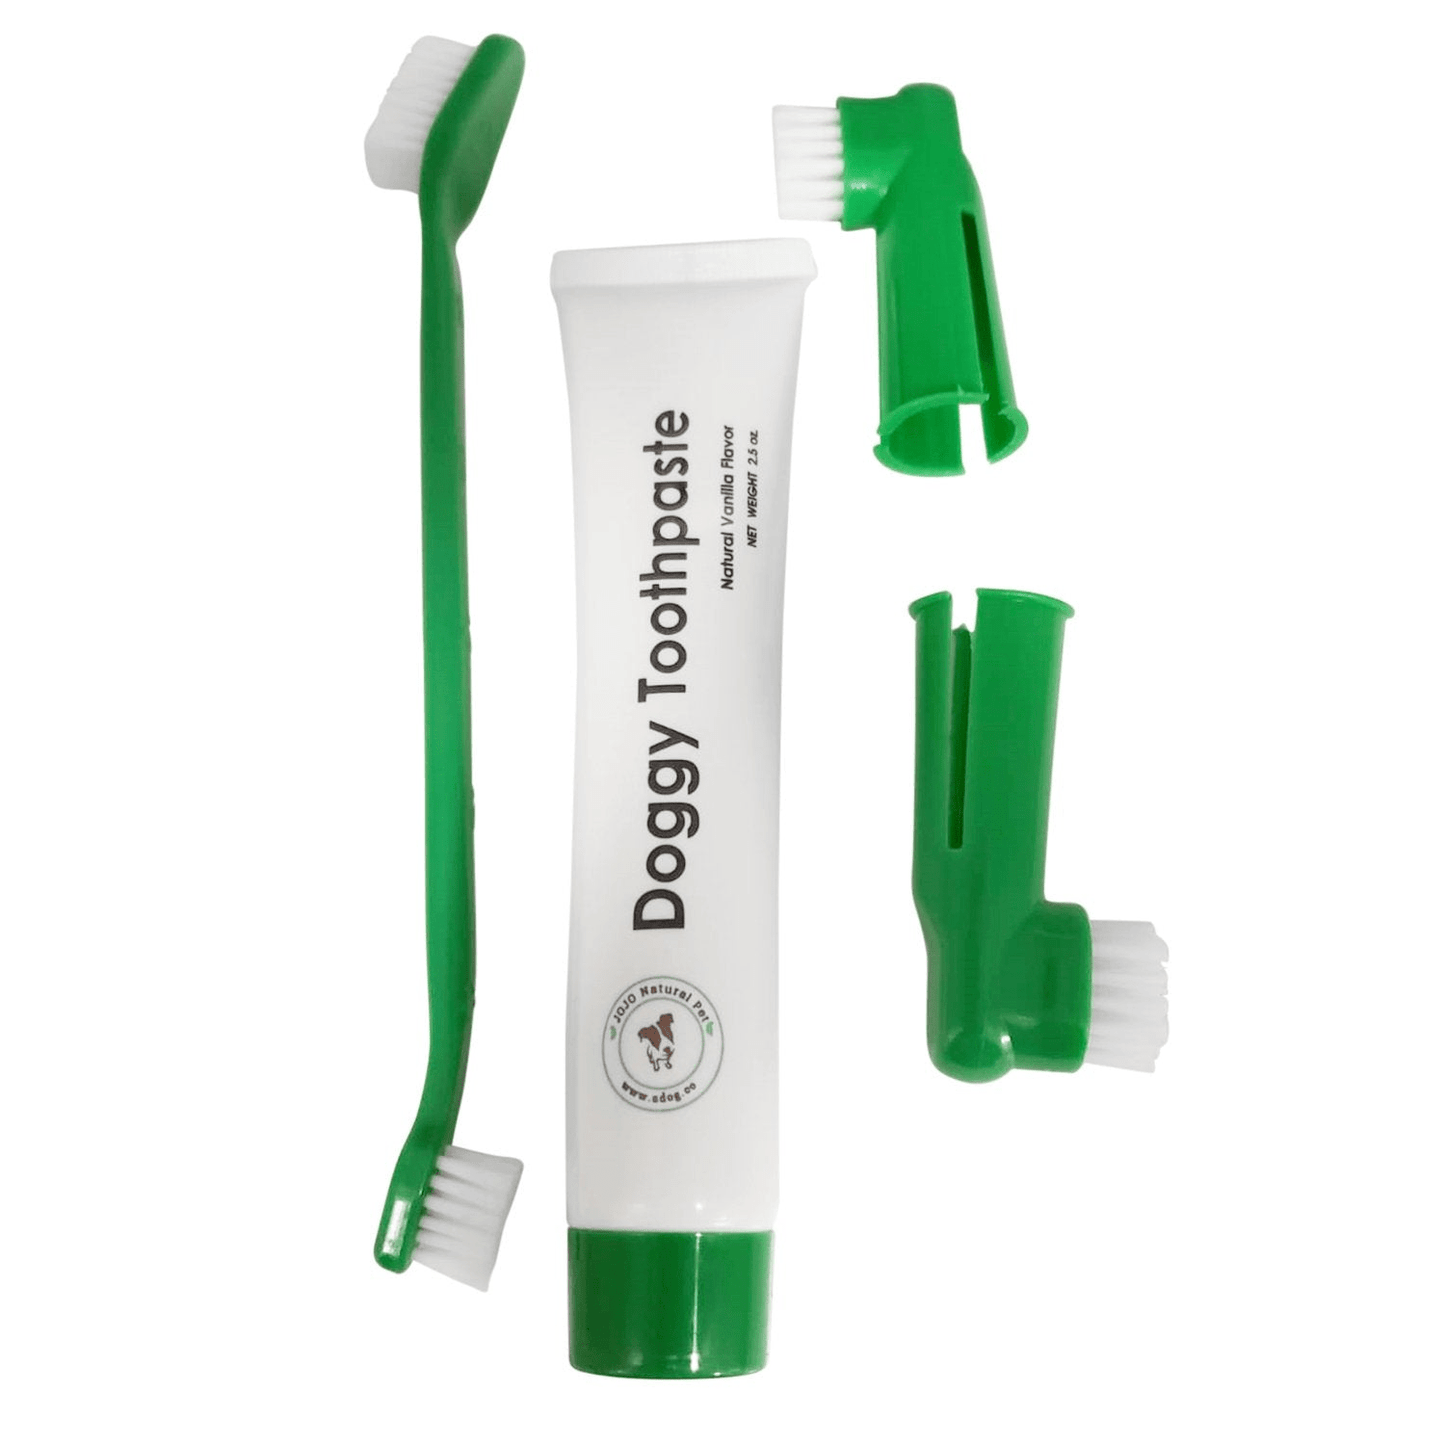 Dog and Pet Stuff Default Dental Kit with Natural Dog Toothpaste - 4 piece